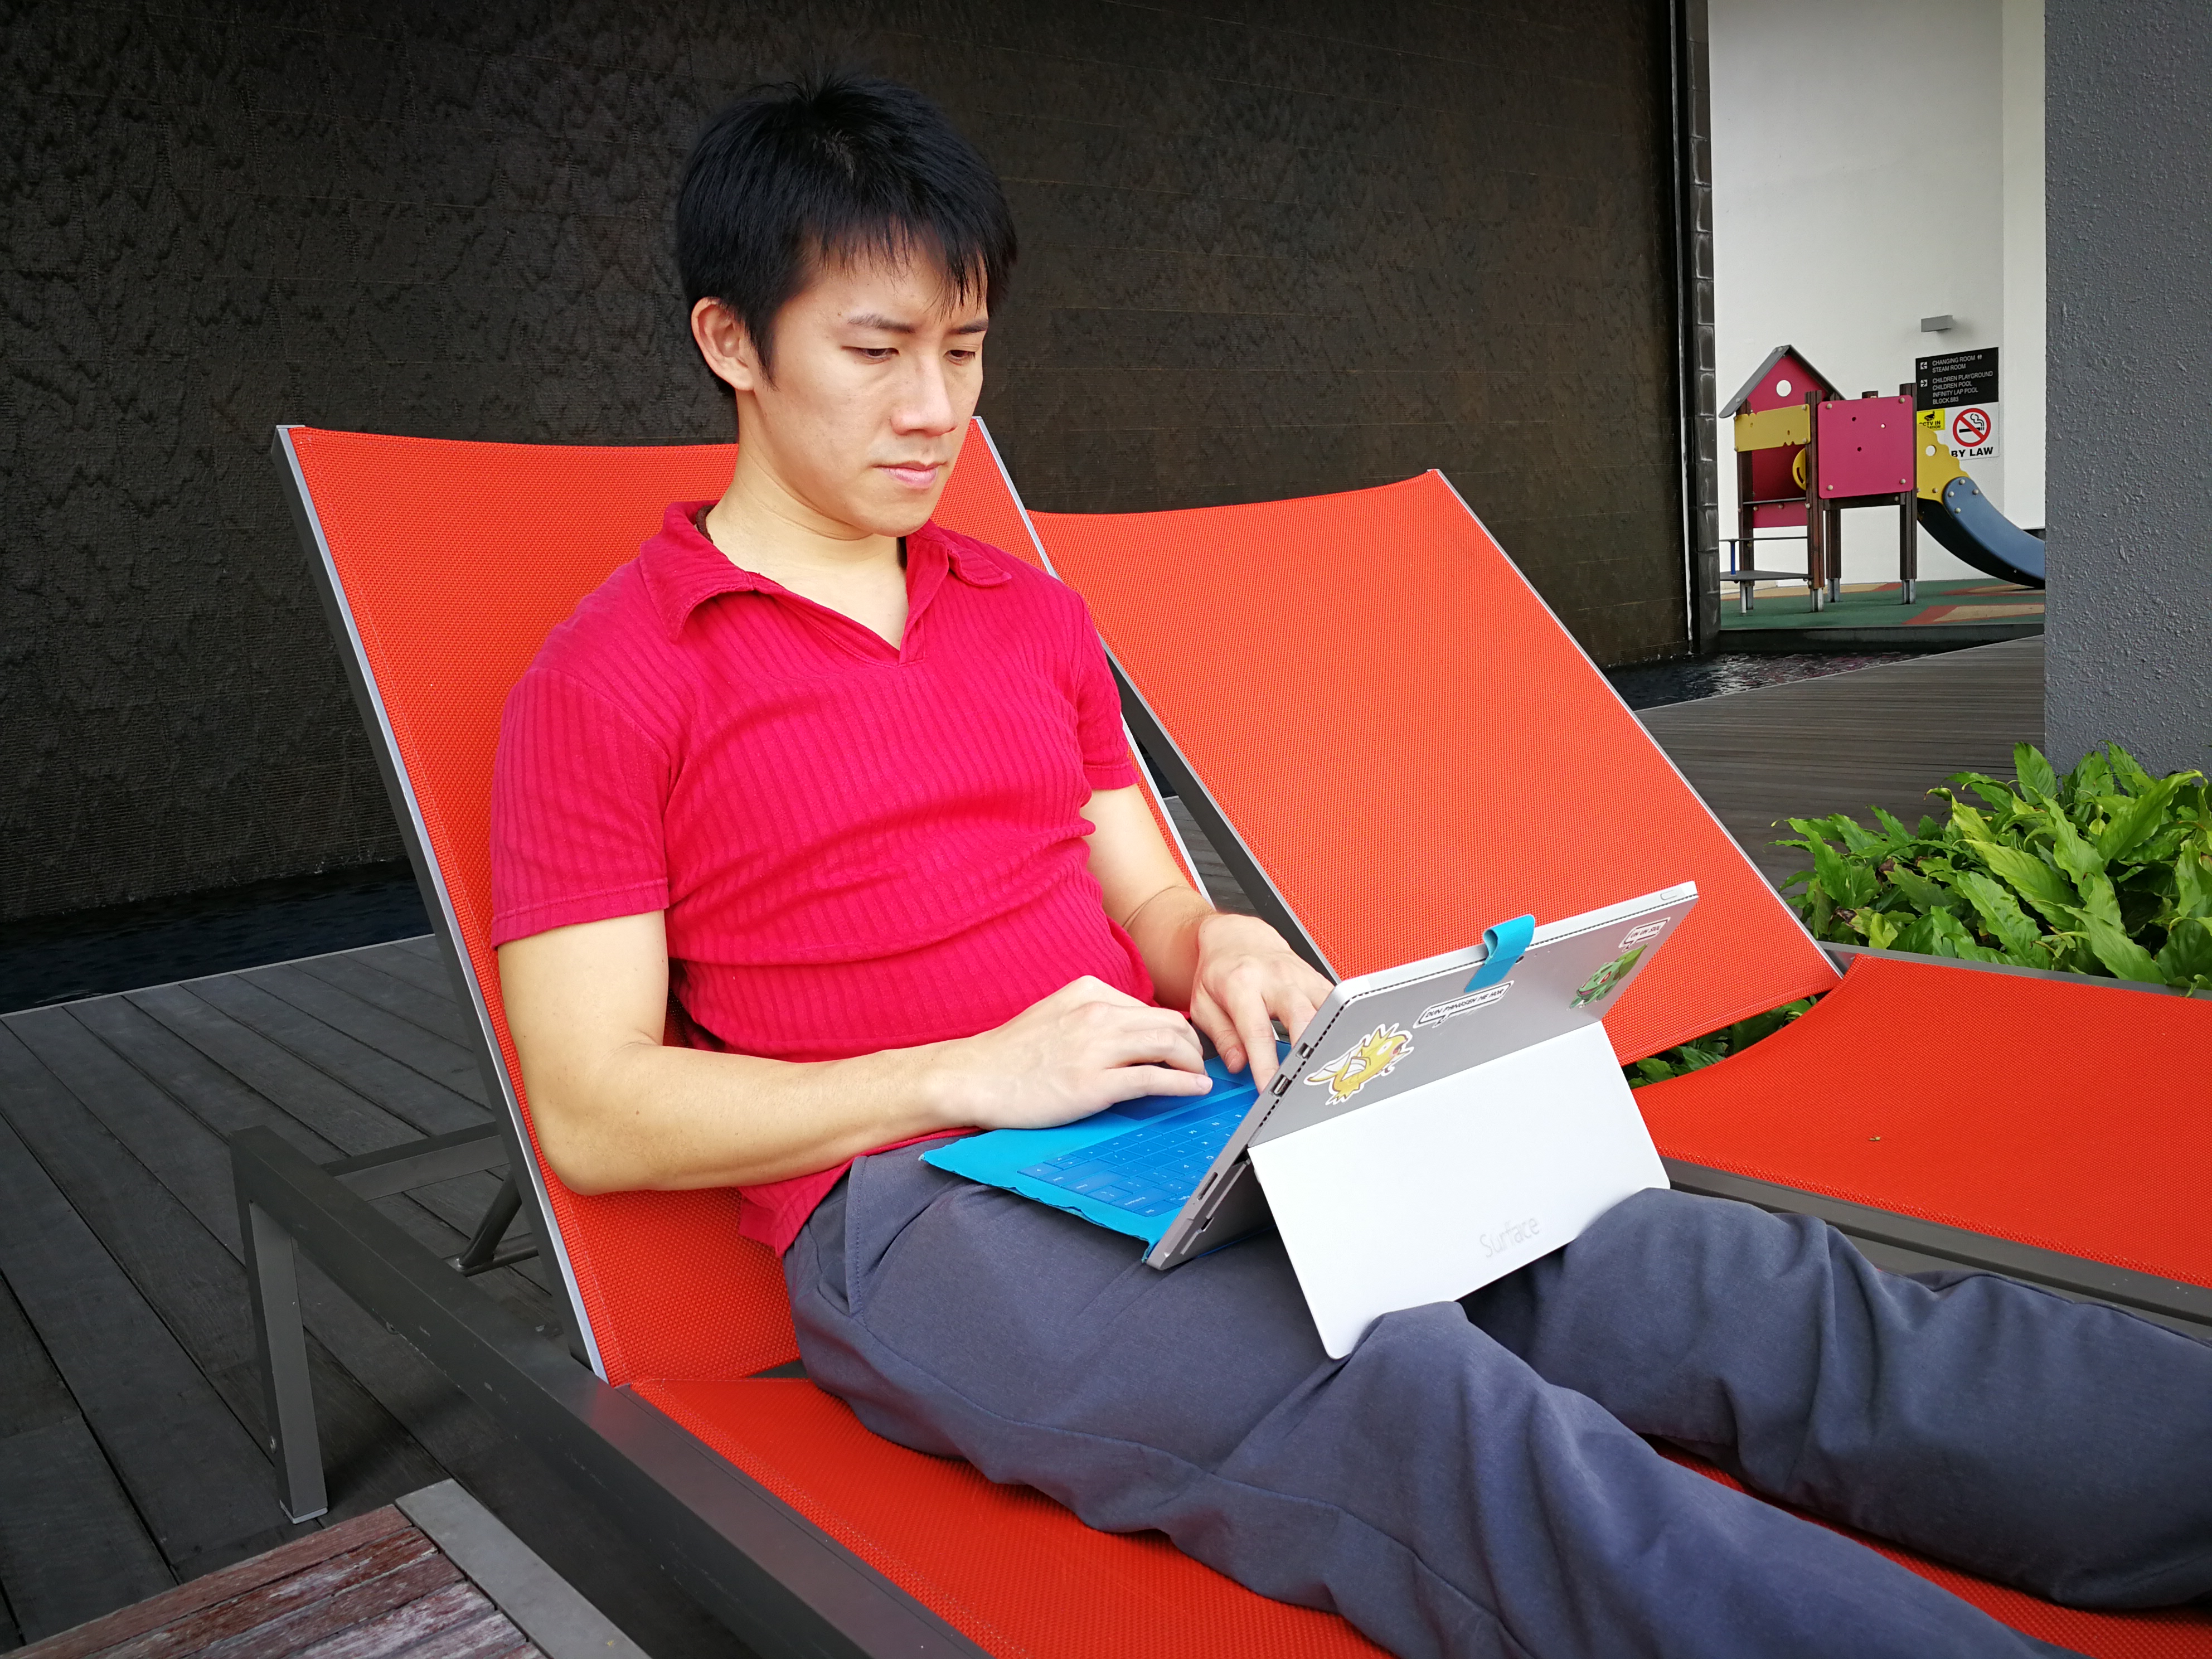 Terence Pek iotalents working at Southbank office chiling out by the pool freelancer winnng